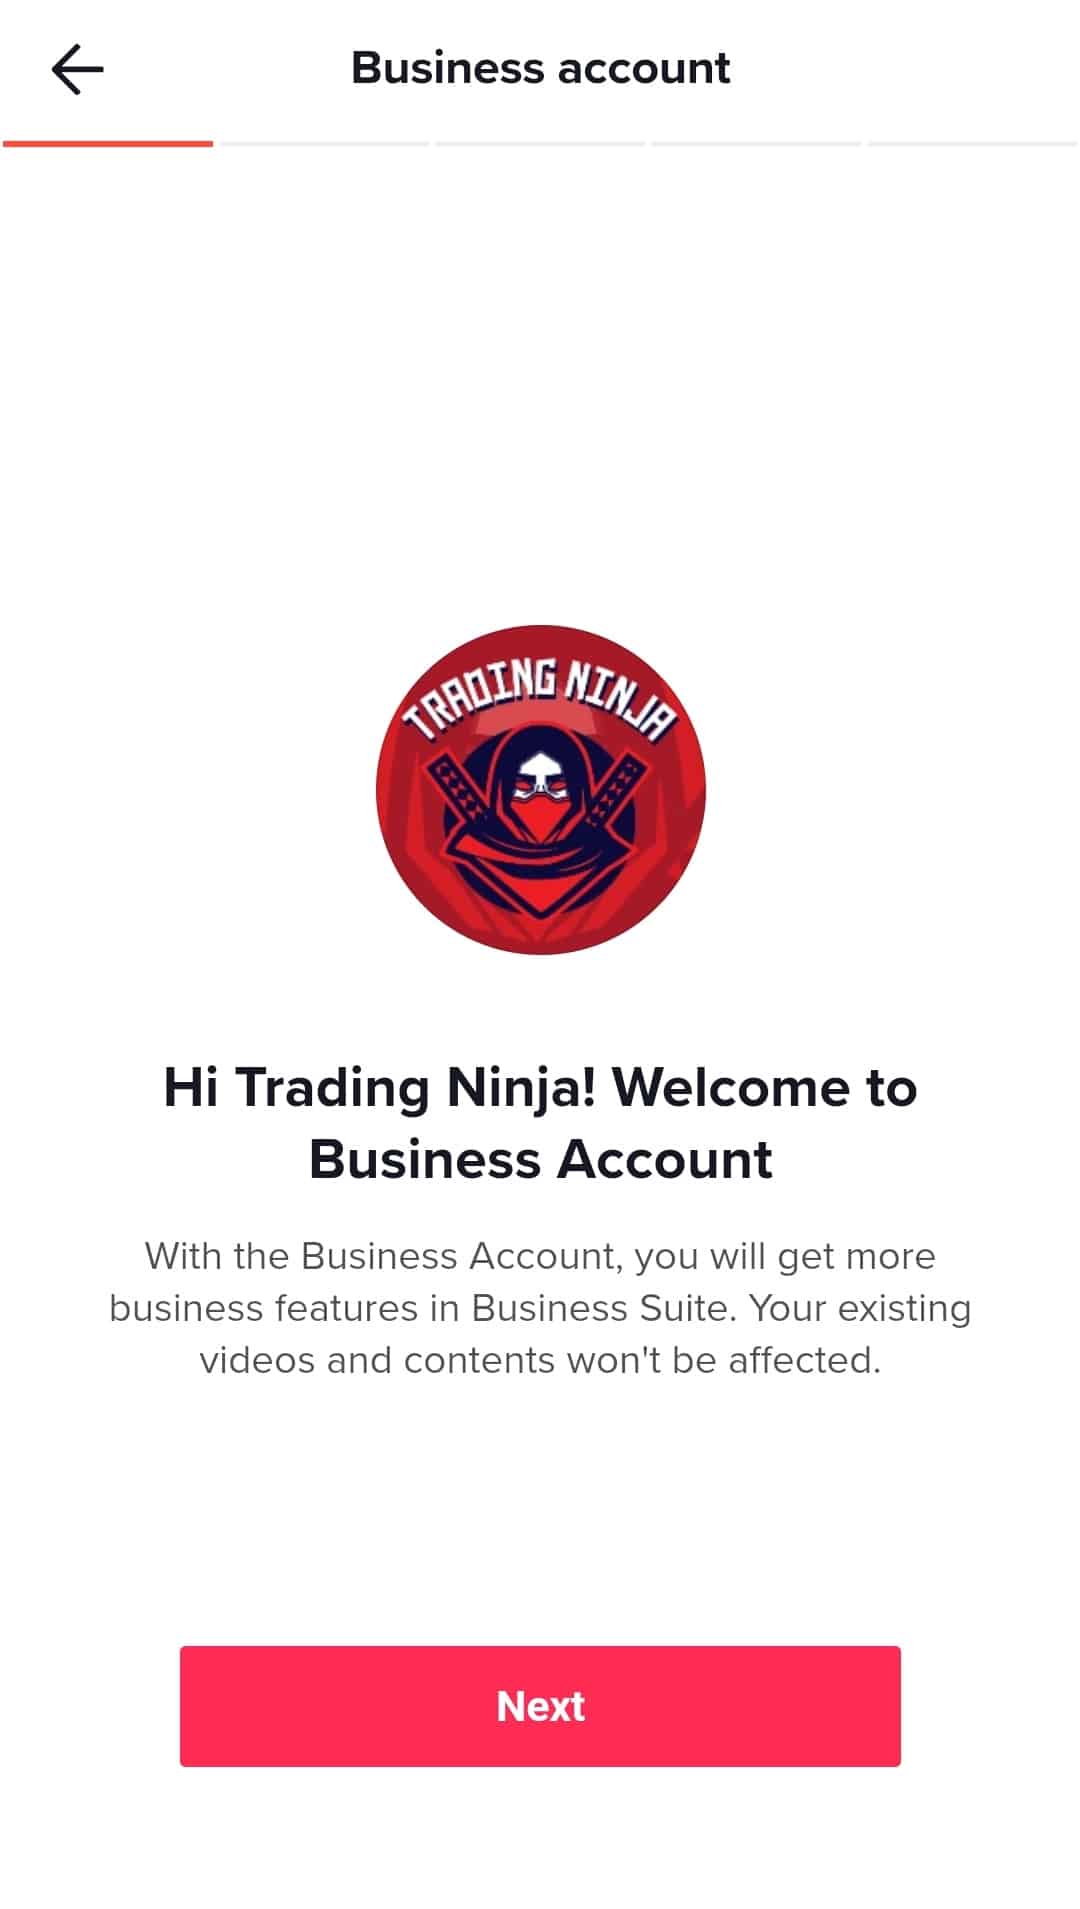 You Will Now See Some Information Regarding A Business Account